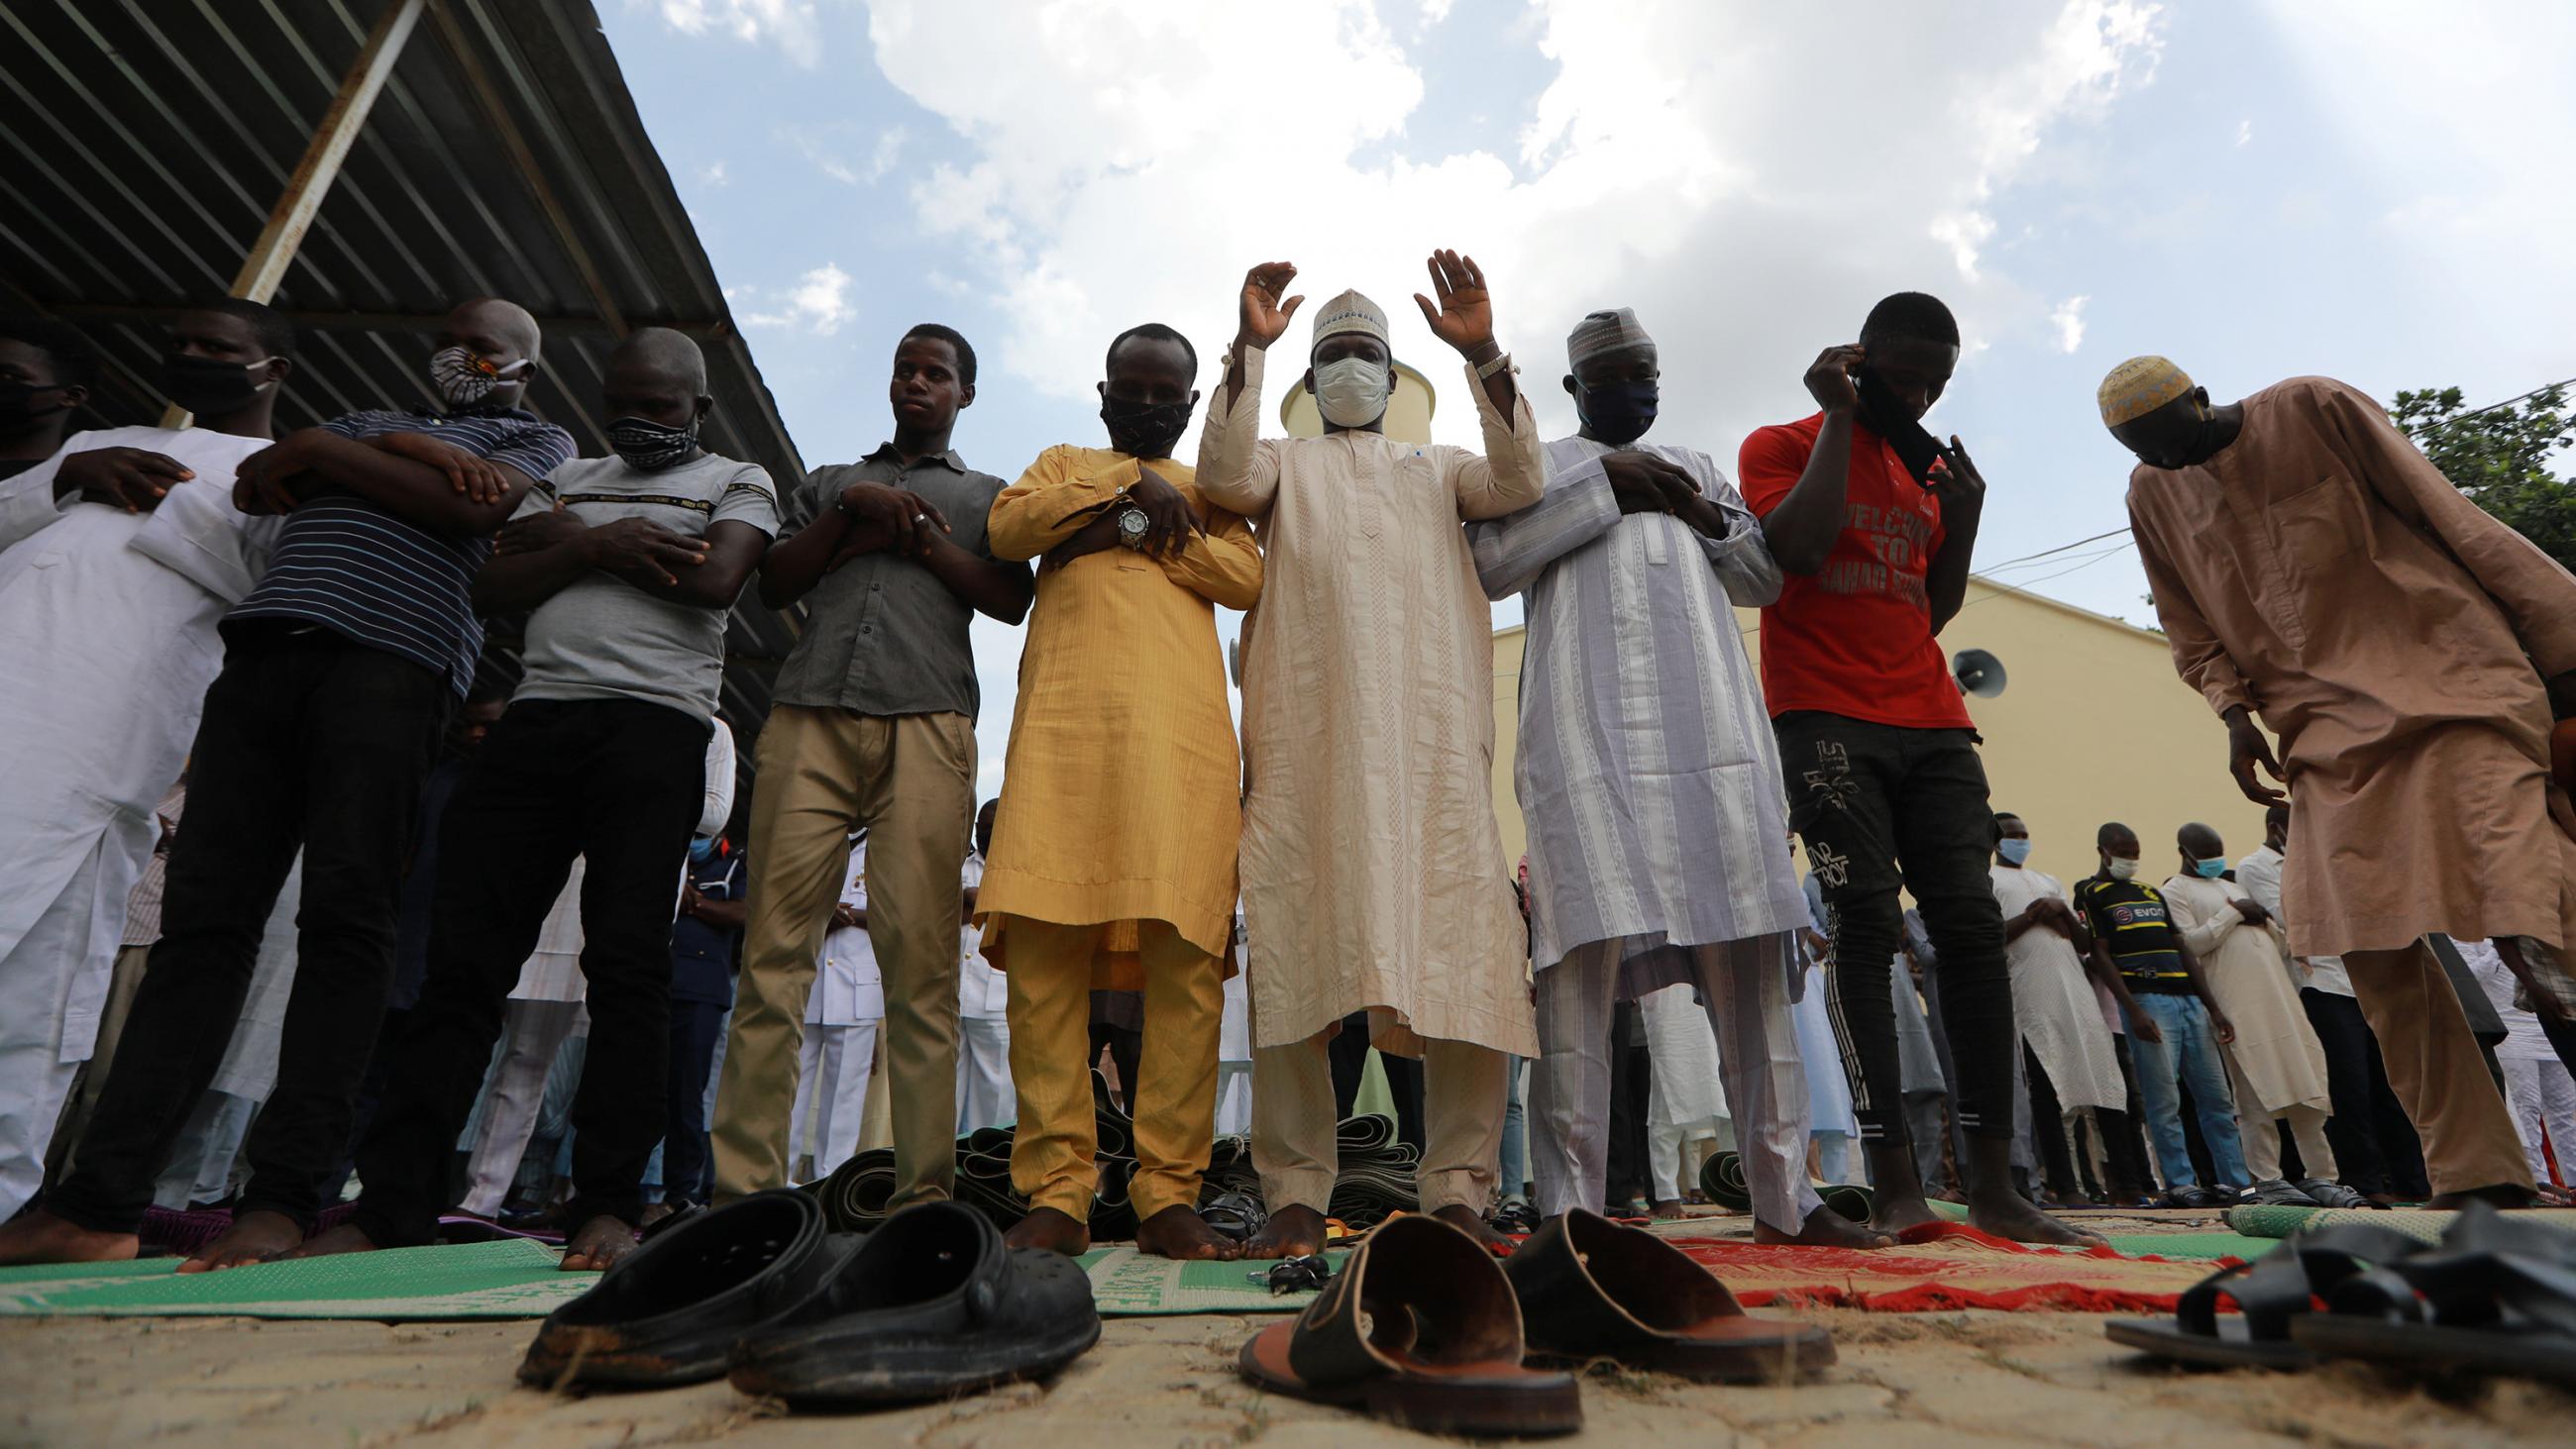 The photo shows a line of muslim men praying. 